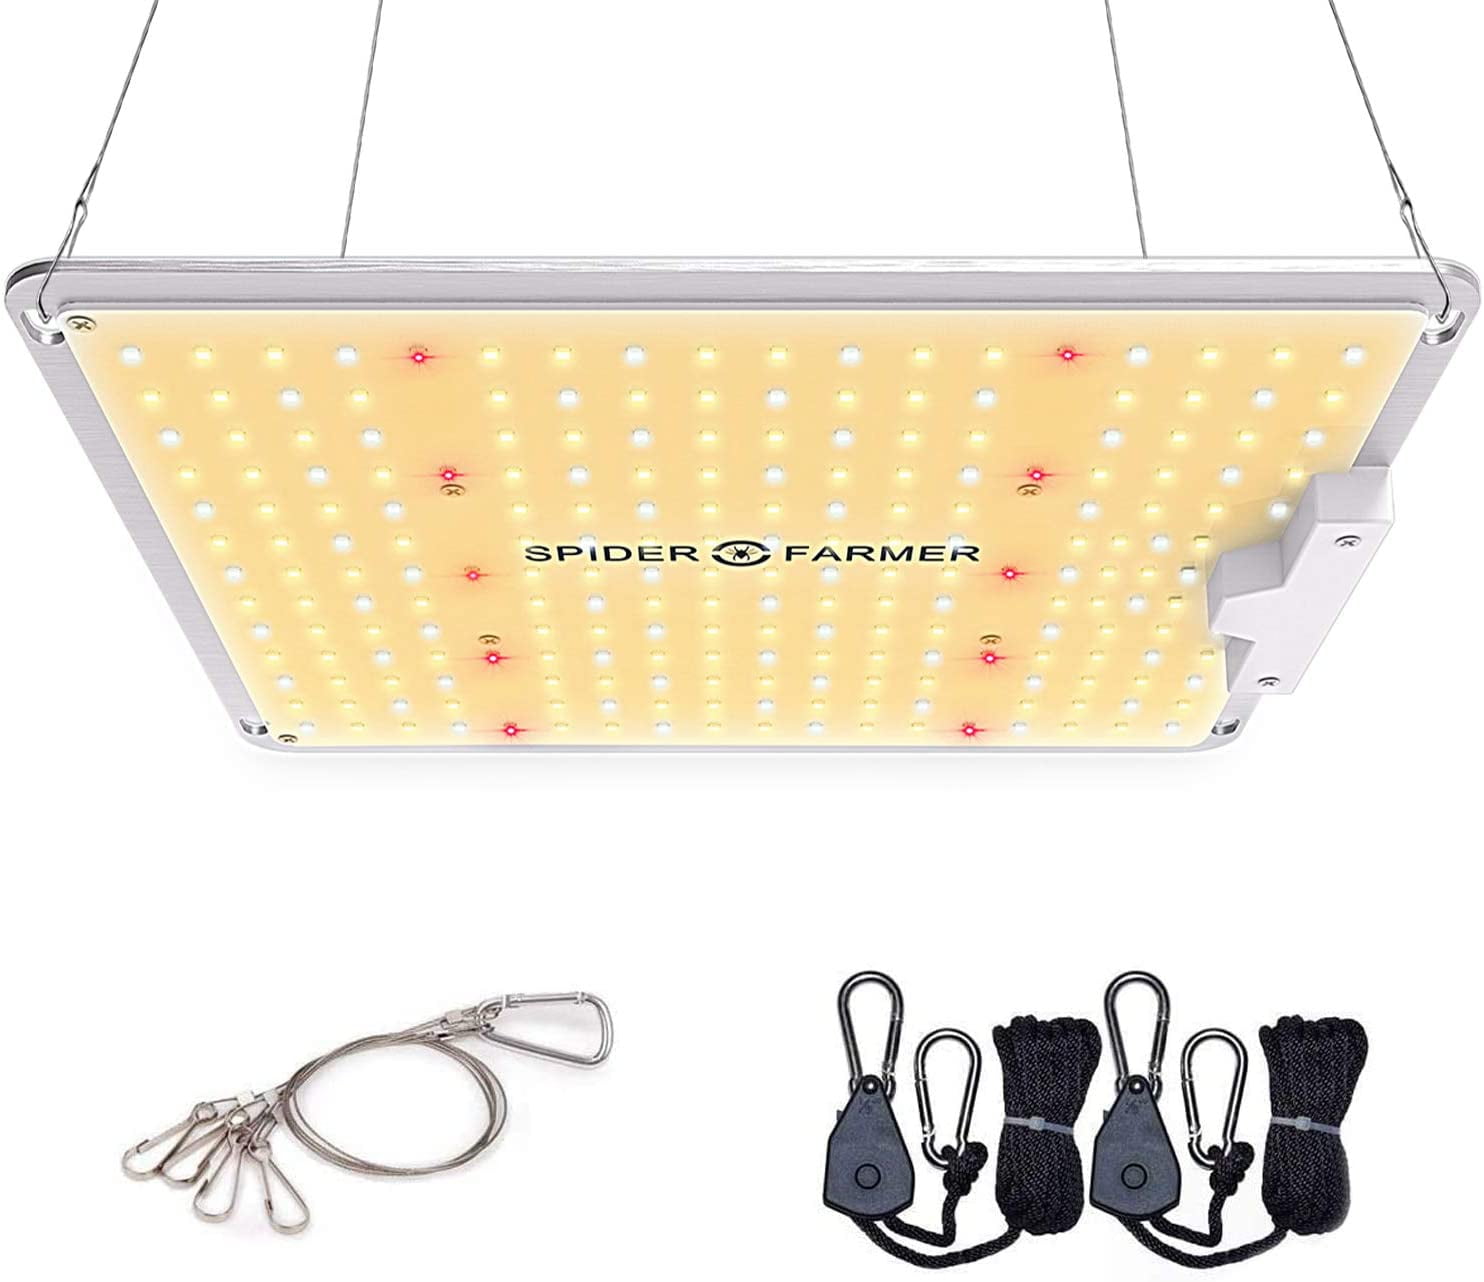 Sunlike Full Spectrum 3000K 5000K 660nm 760nm IR for Indoor Plants Veg Flower Spider Farmer SF 1000 LED Grow Light,with Samsung Chips LM301B & Dimmable Mean Well Driver 